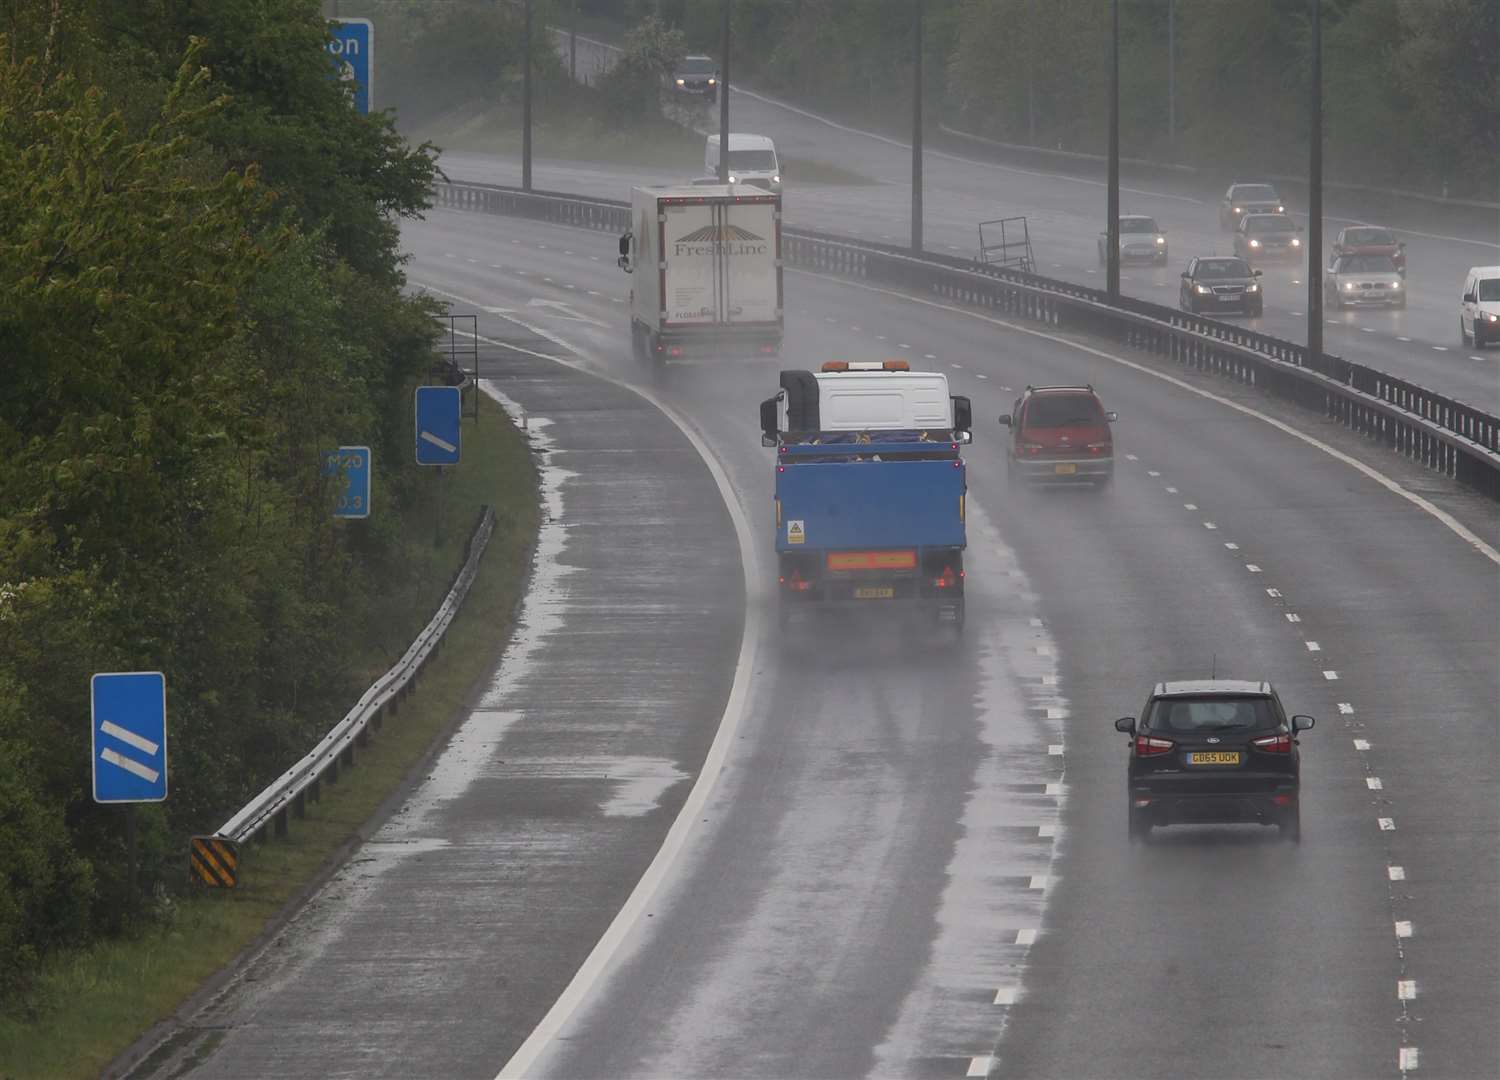 Two London-bound lanes on the M20 were closed between Junctions 7 and 8. Picture: John Westhrop